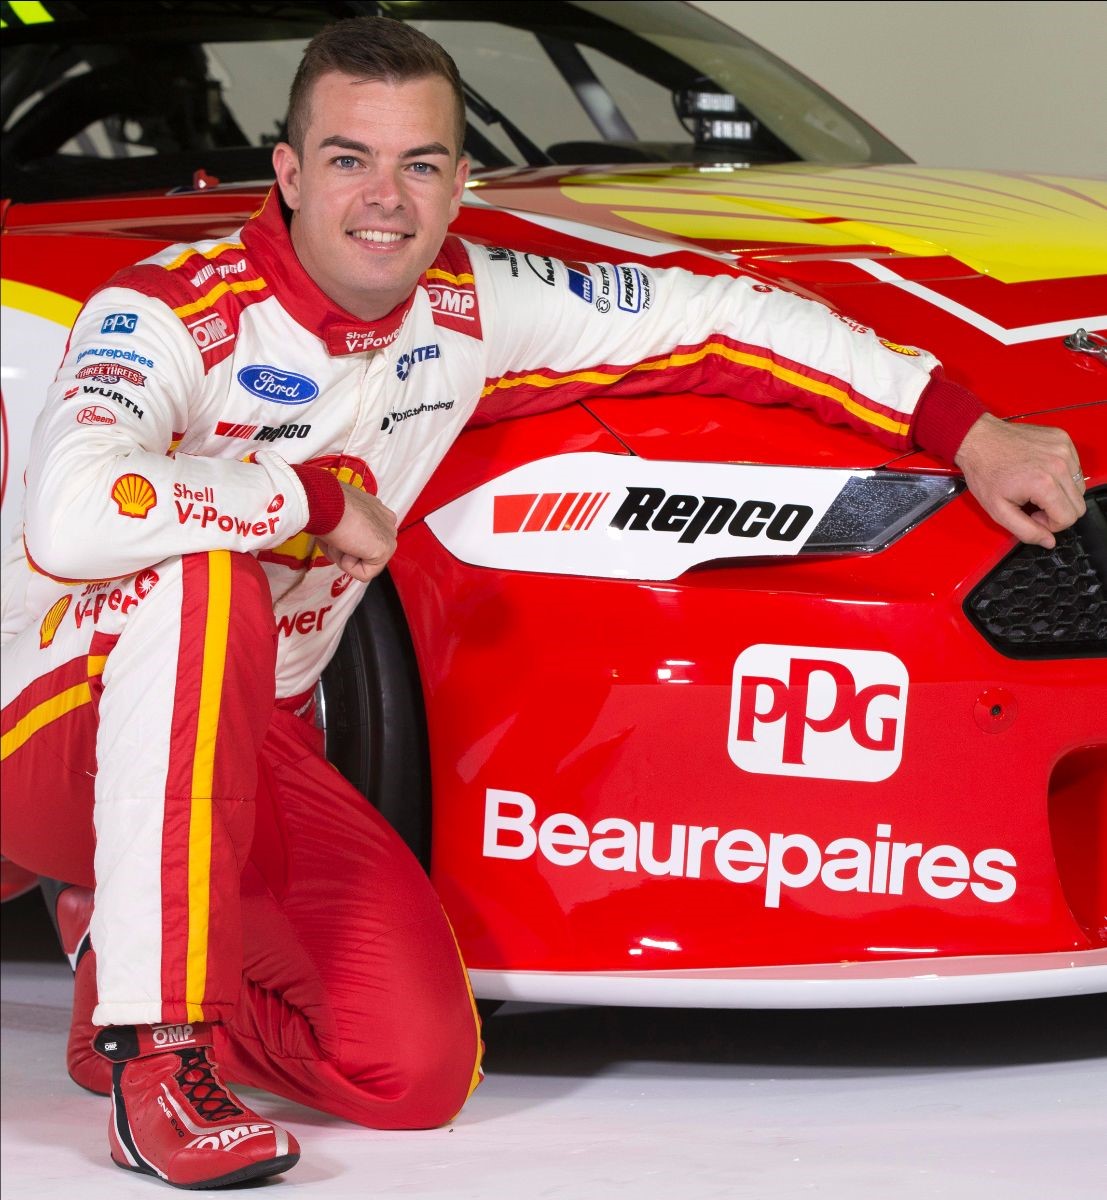 BEAUREPAIRES EXPANDS PARTNERSHIP WITH SHELL V-POWER RACING ...